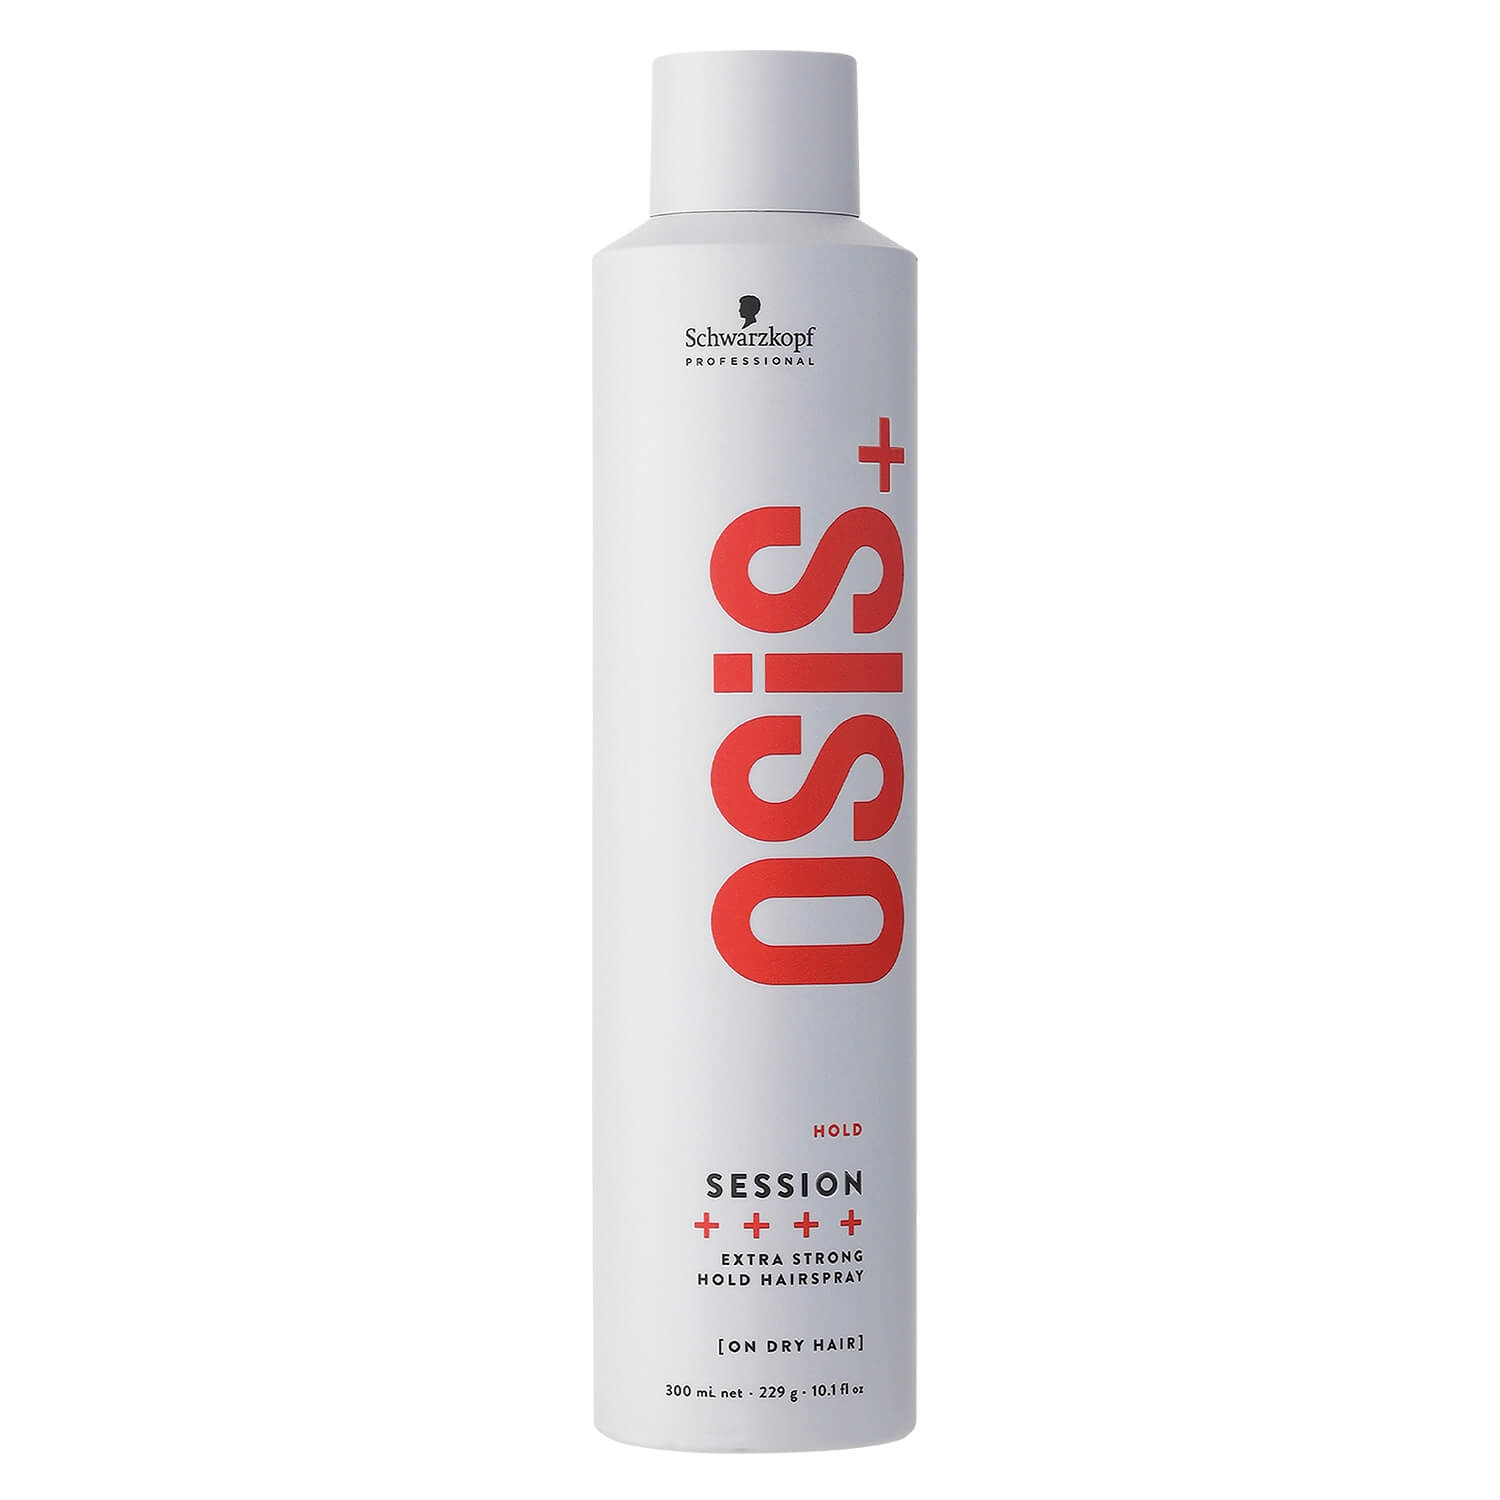 Produktbild von Osis - Session Extra Strong Hold Hairspray